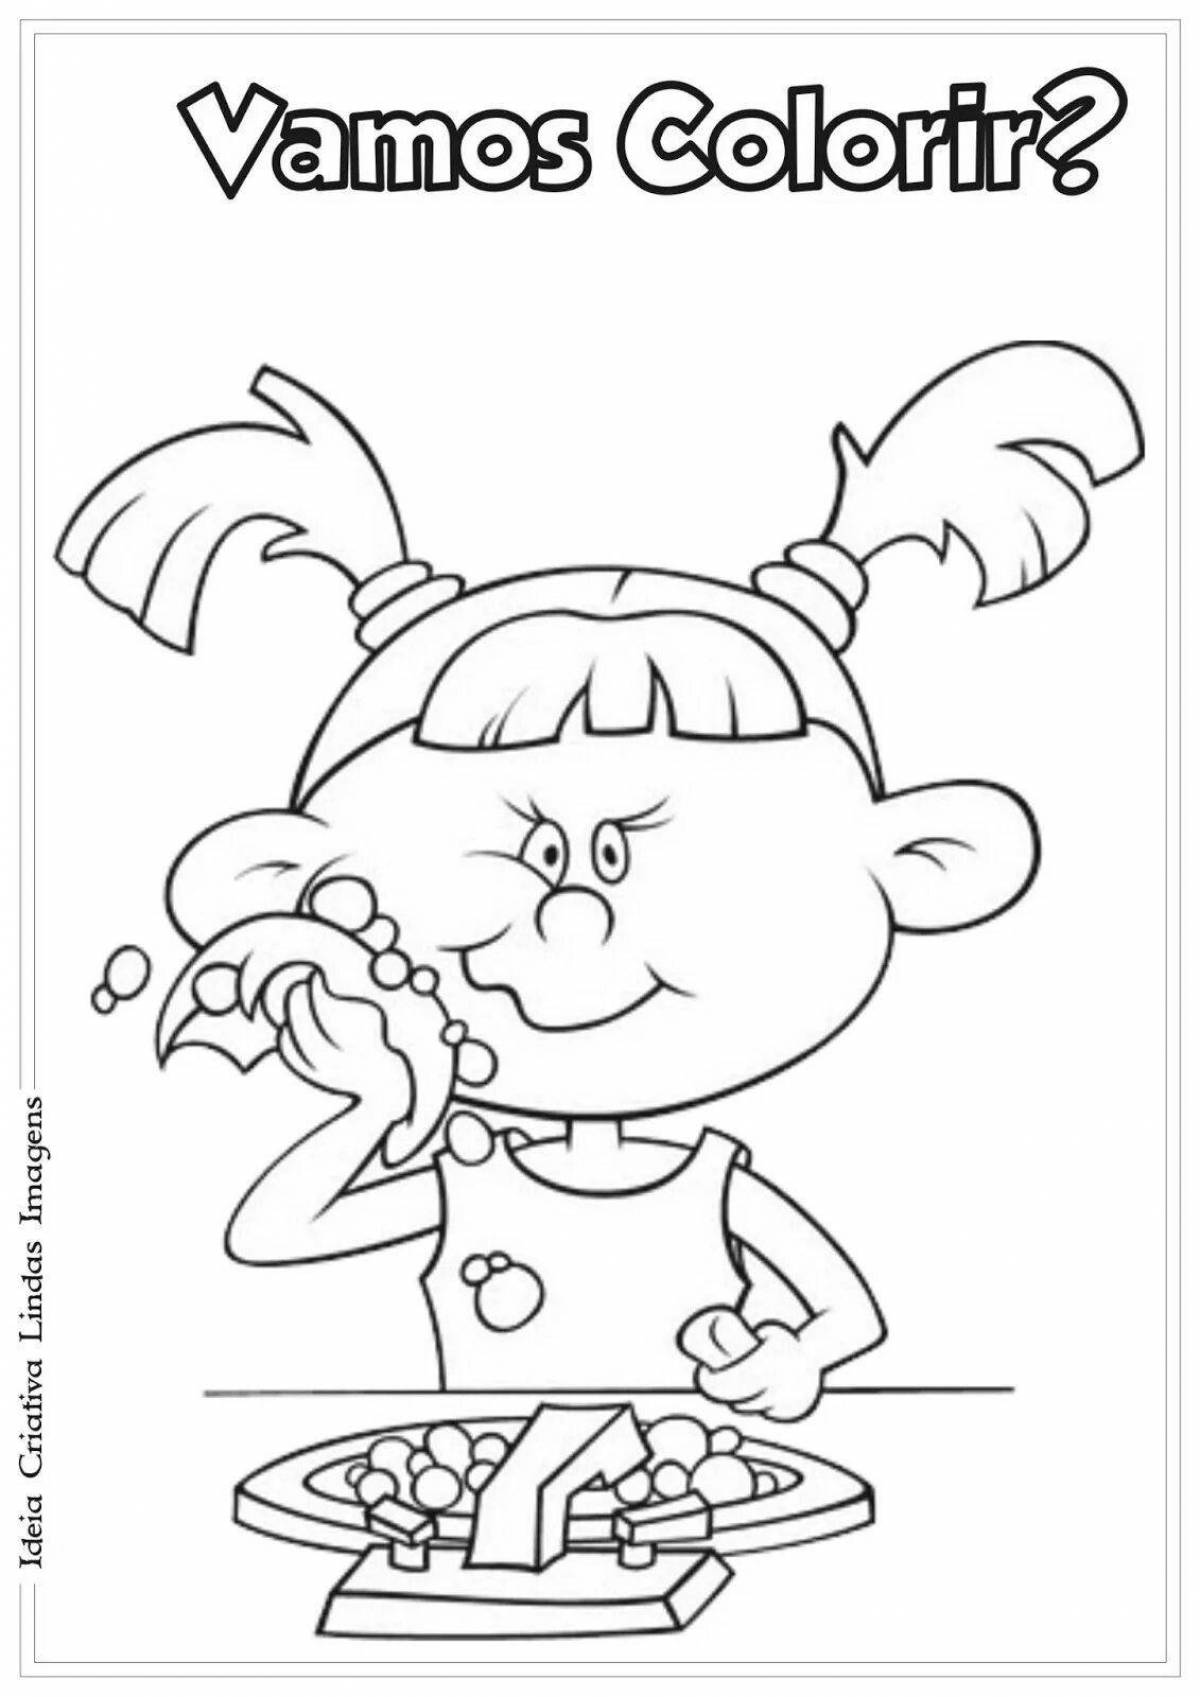 Fun table manners coloring page